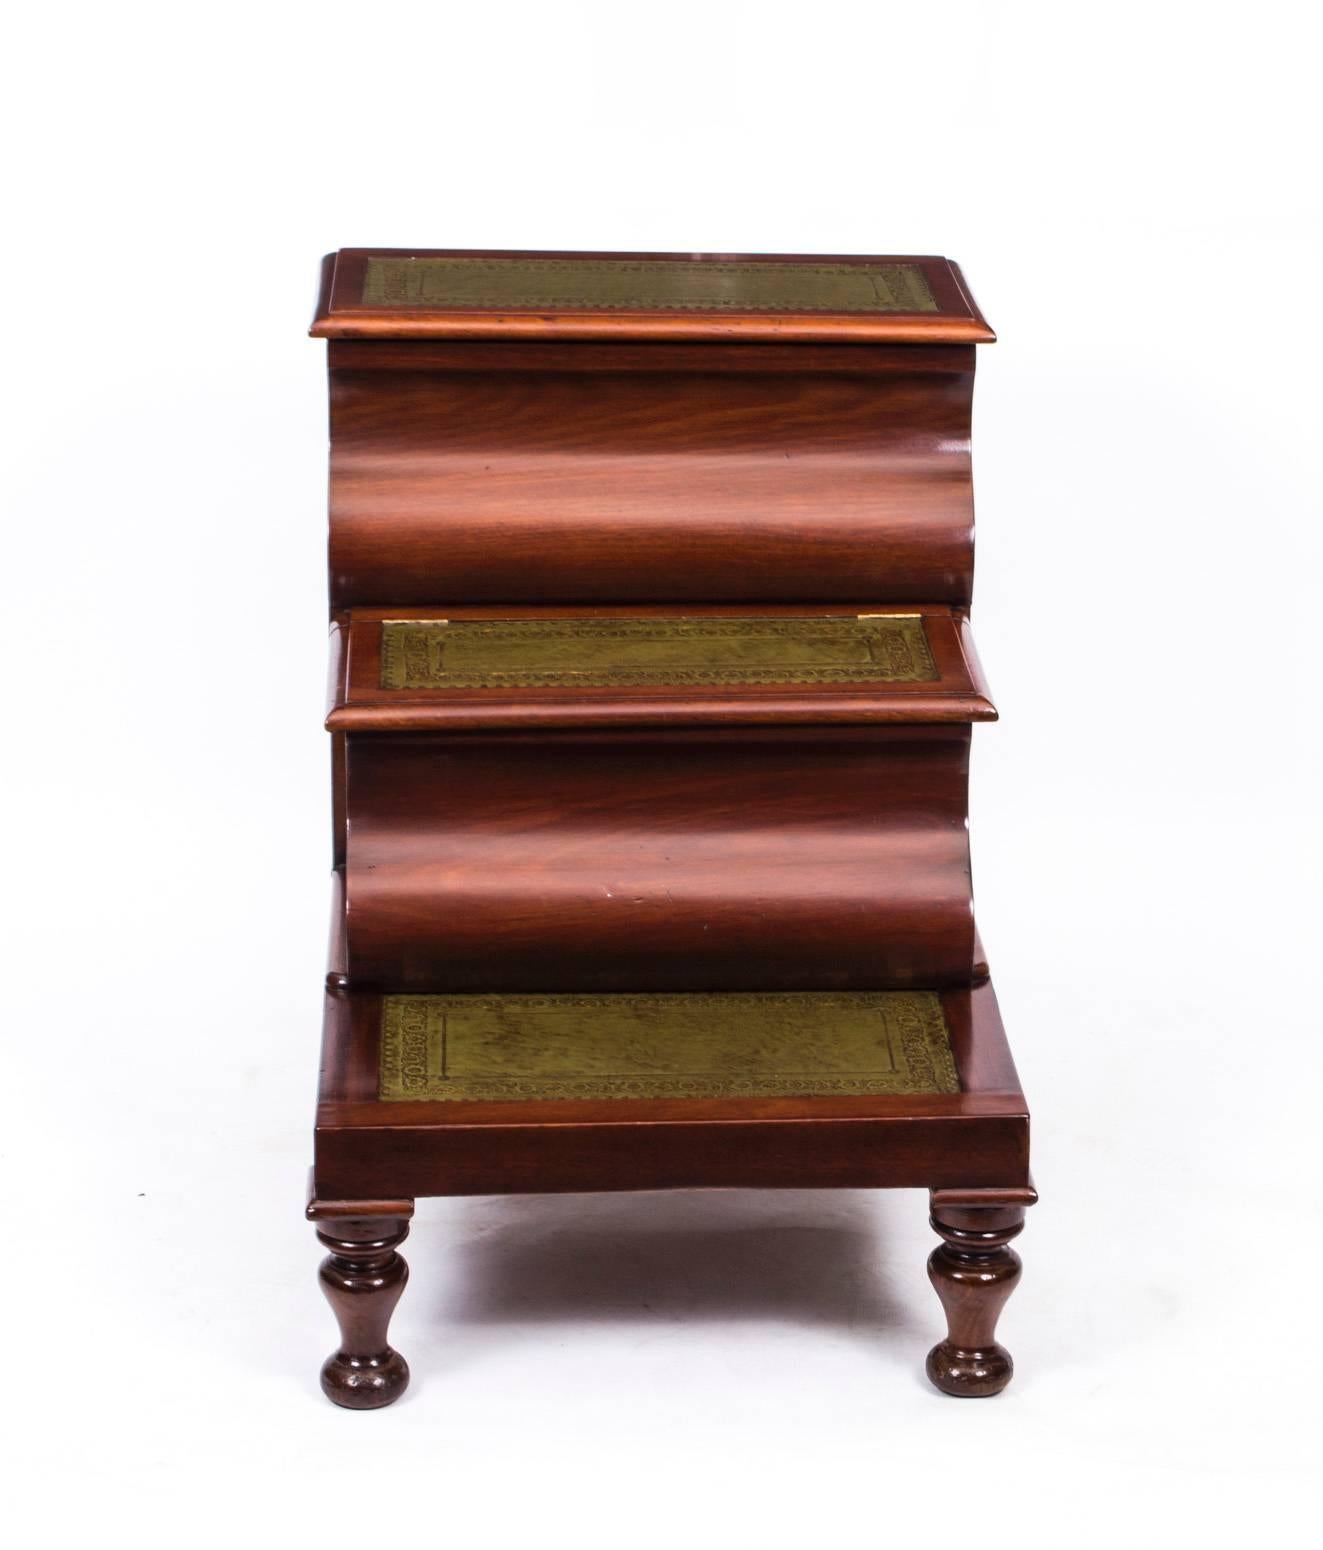 This is a beautiful set of antique Victorian flame mahogany library or bed steps, circa 1870 in date.

The three steps have inset gilt tooled emerald green leather treads. The top and middle steps have hinged lids that provide storage and it stands